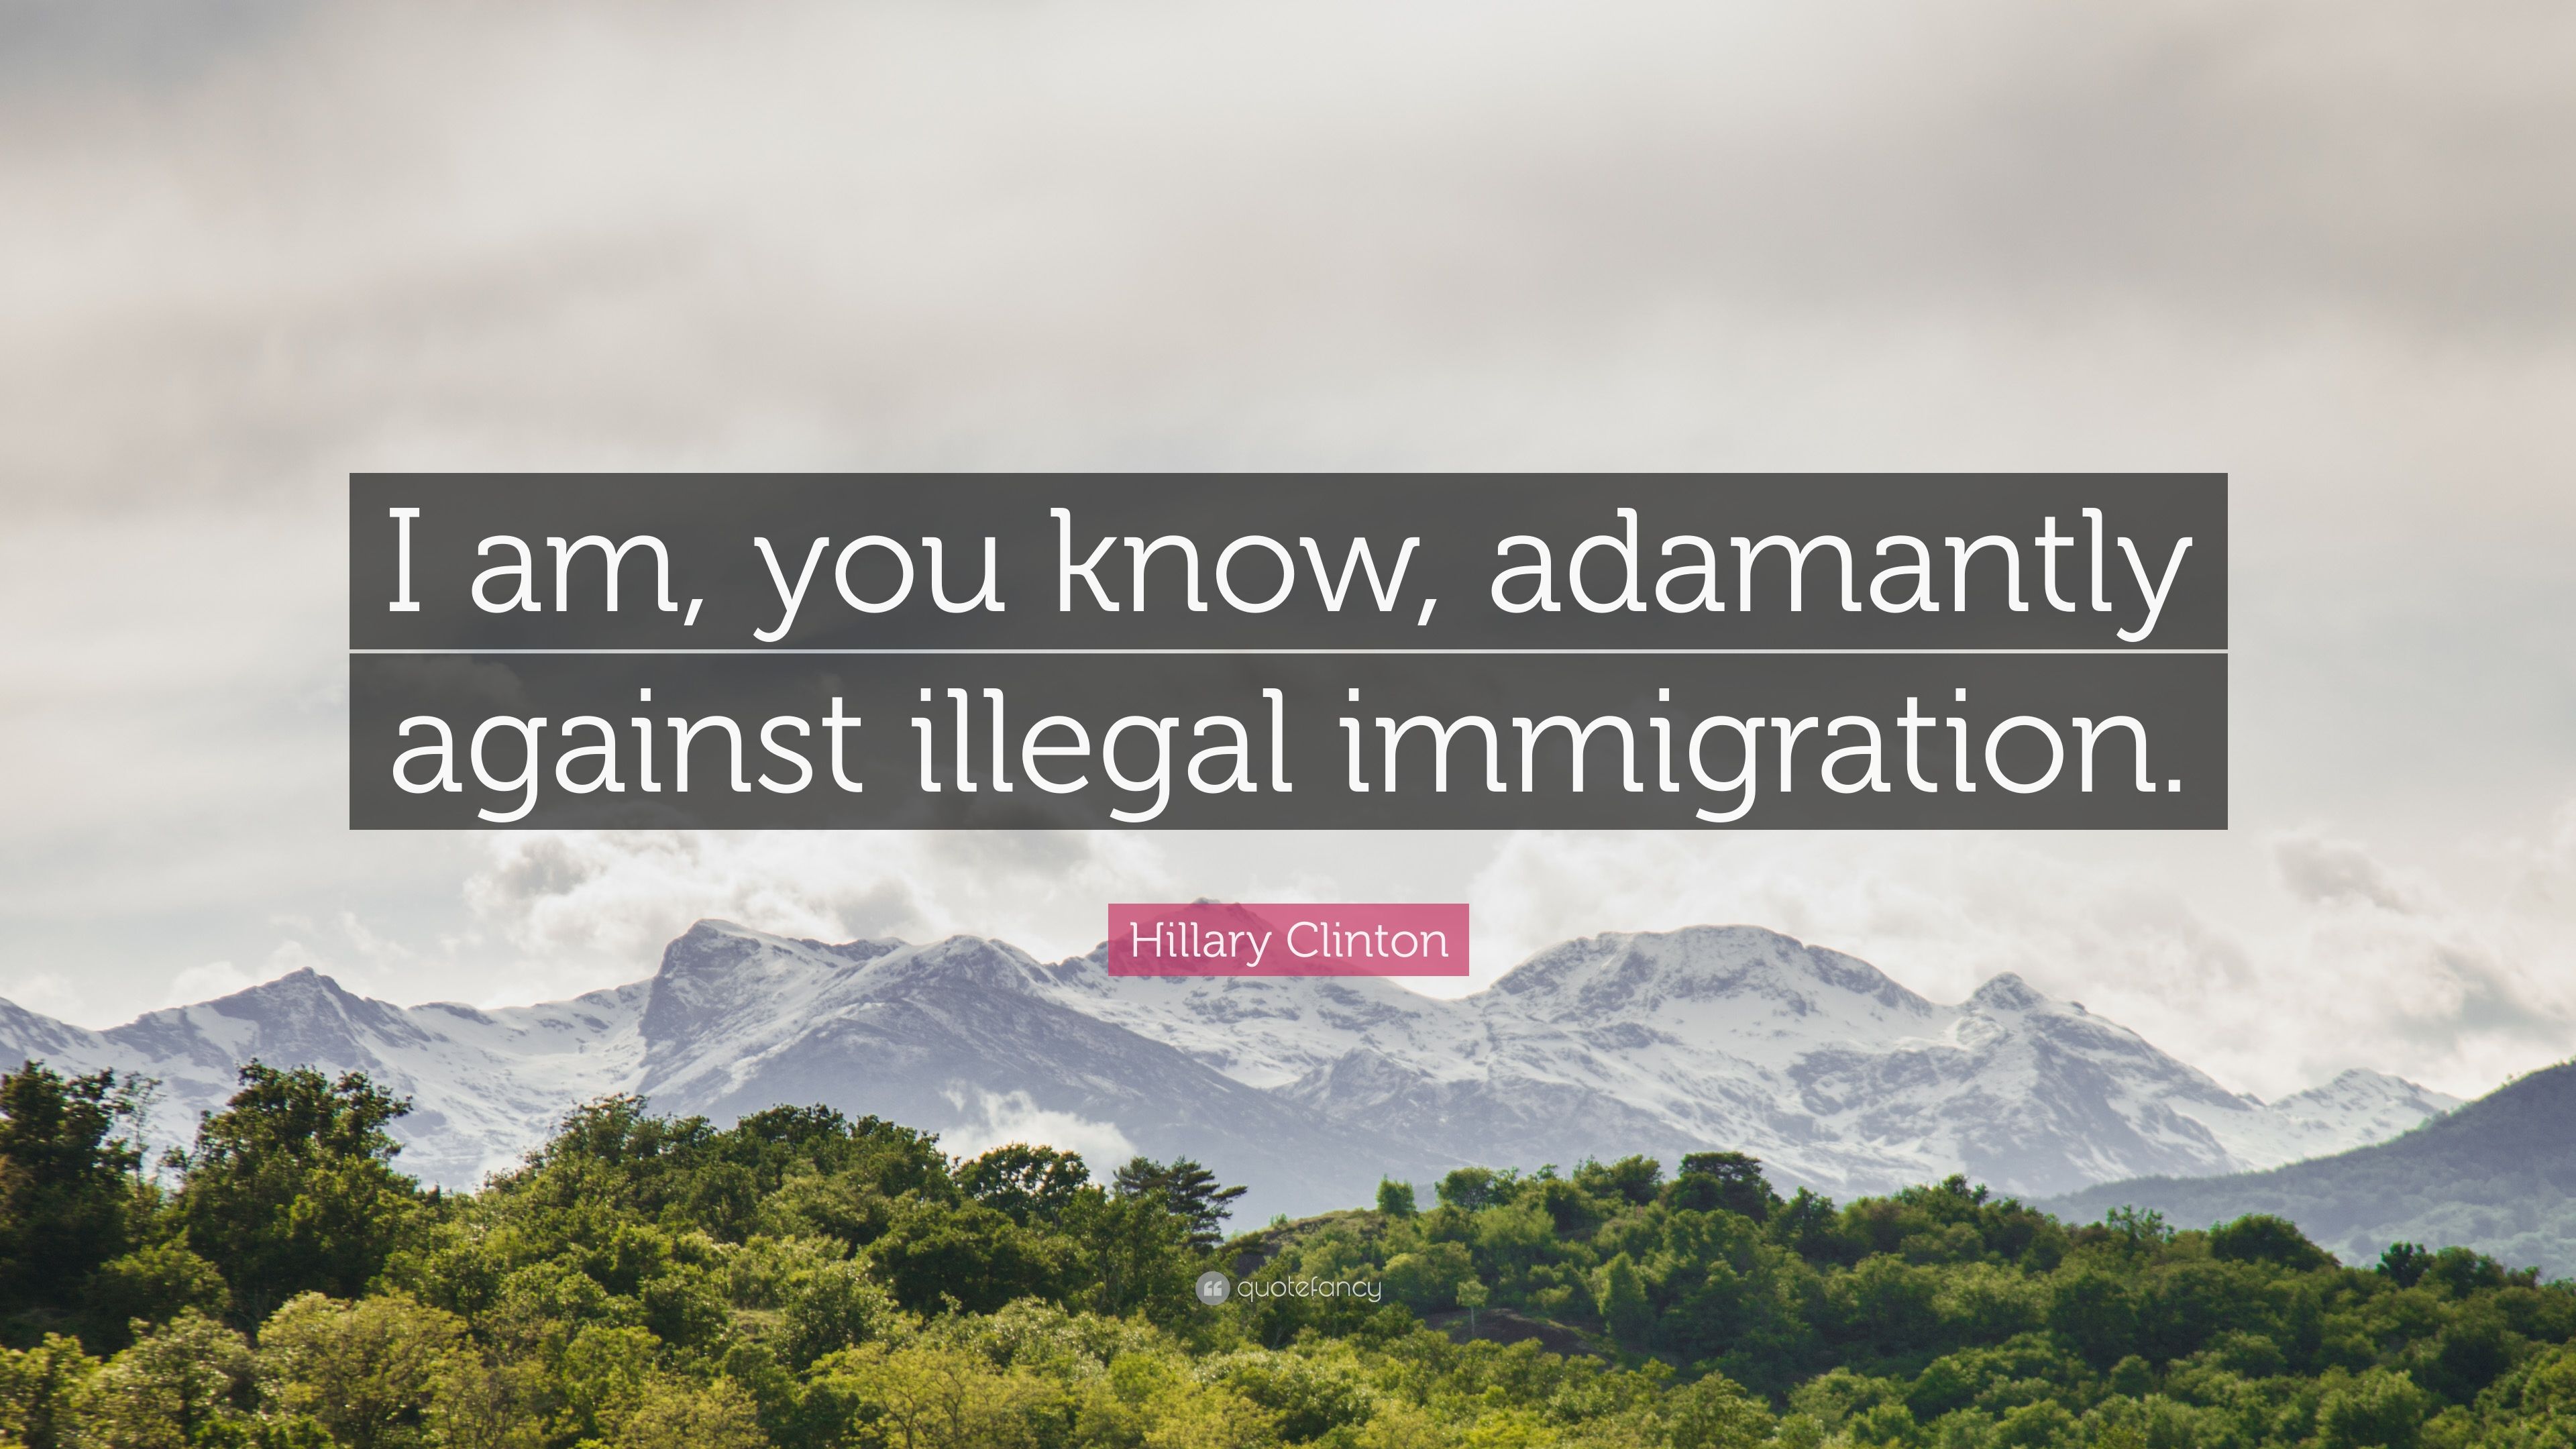 Hillary Clinton Quote: “I am, you know, adamantly against illegal immigration.” (7 wallpaper)